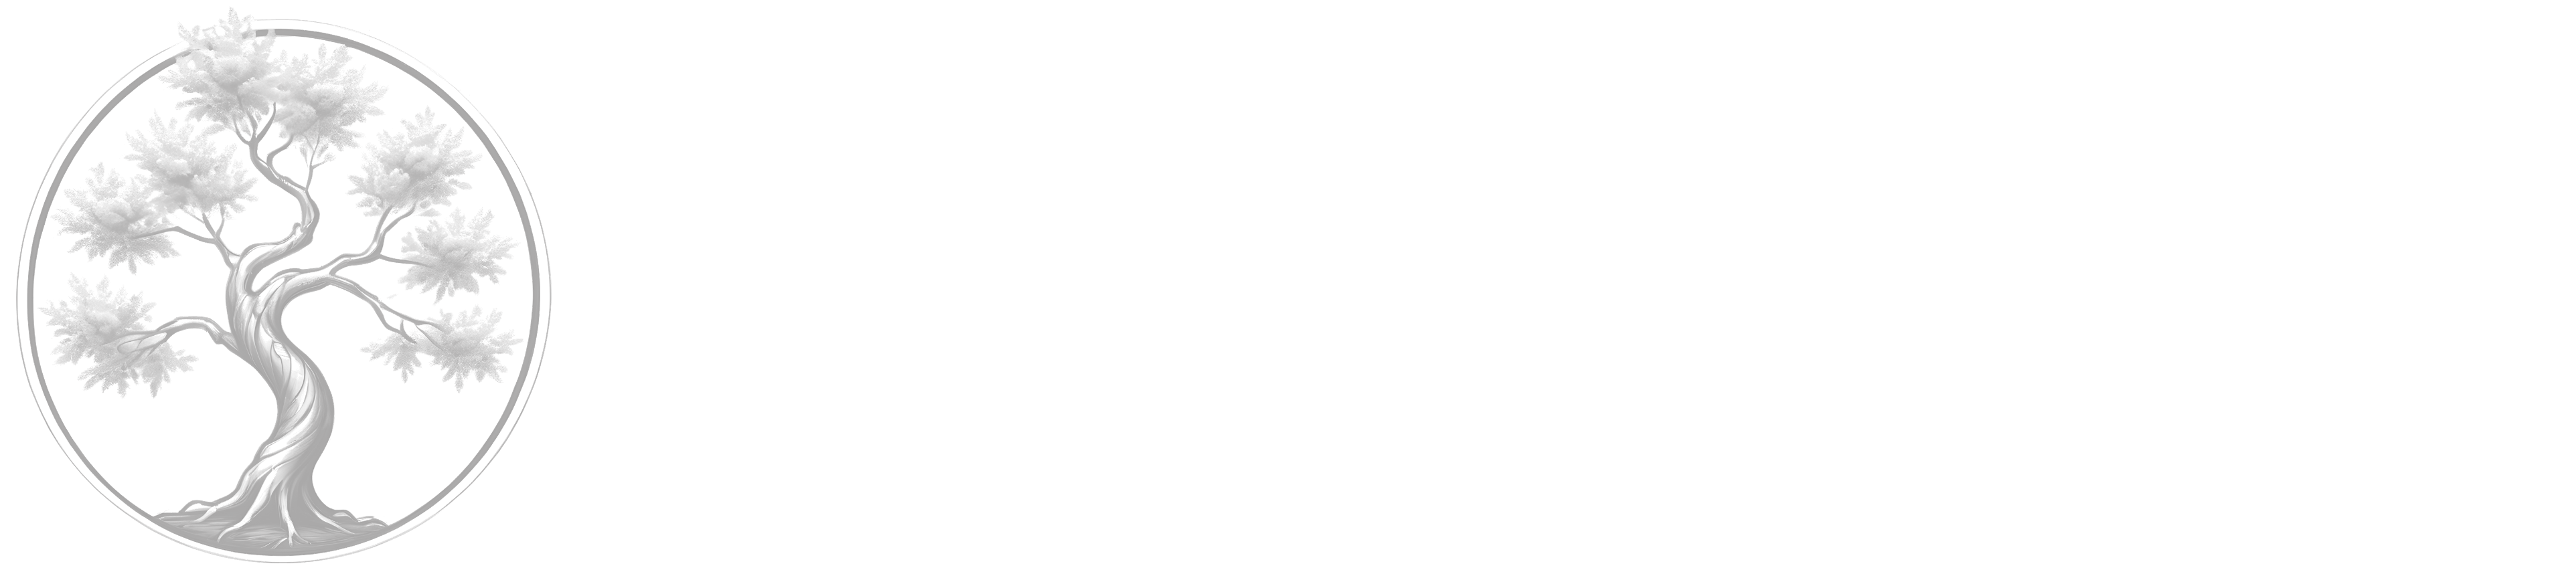 KnobThorn Consulting